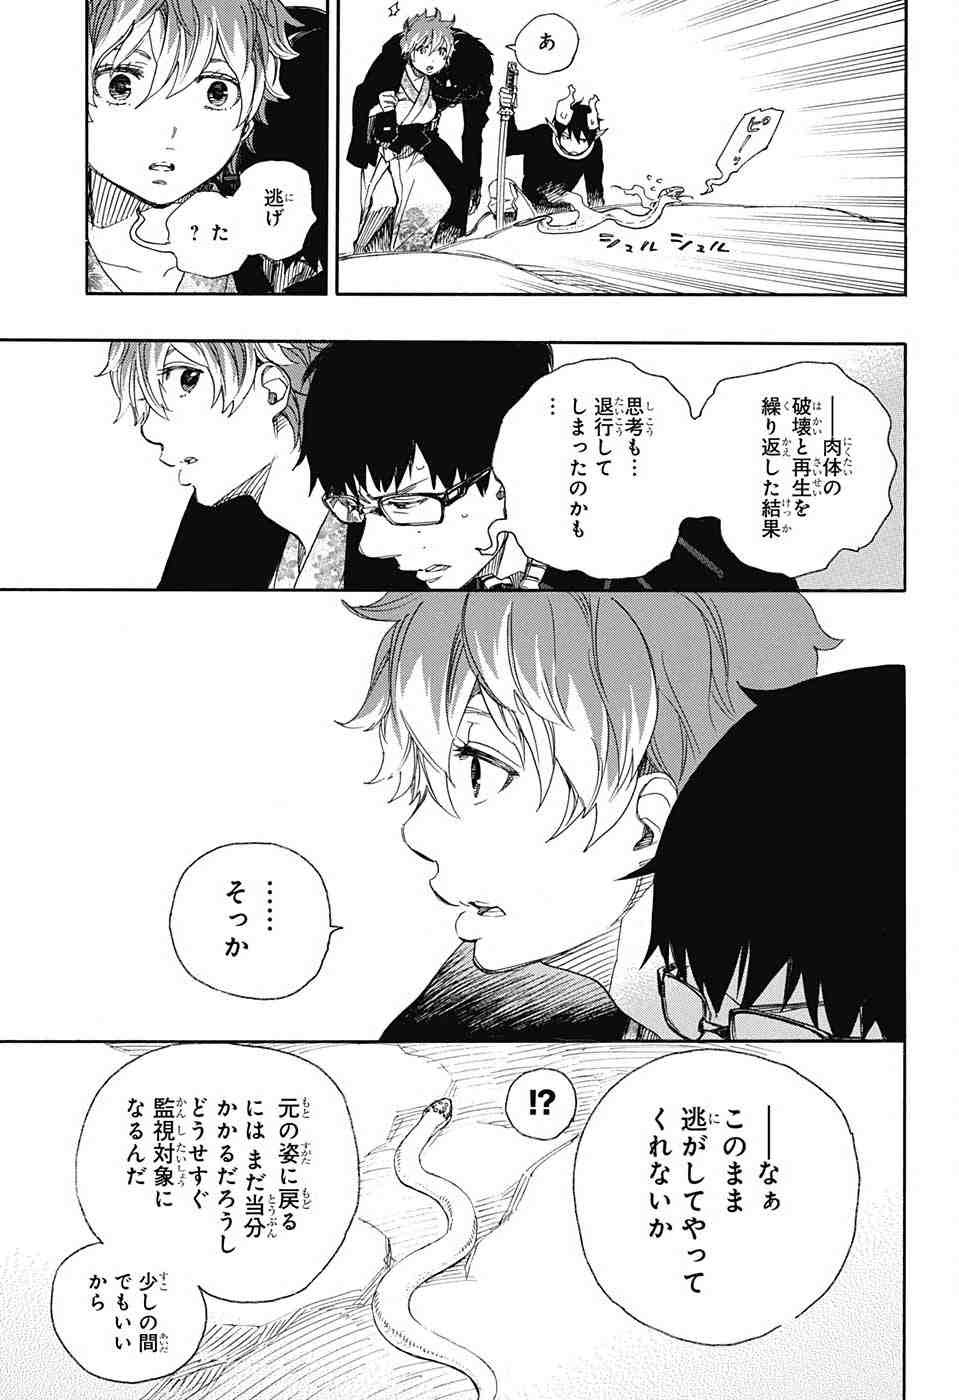 Ao no Exorcist - Chapter 79 - Page 32